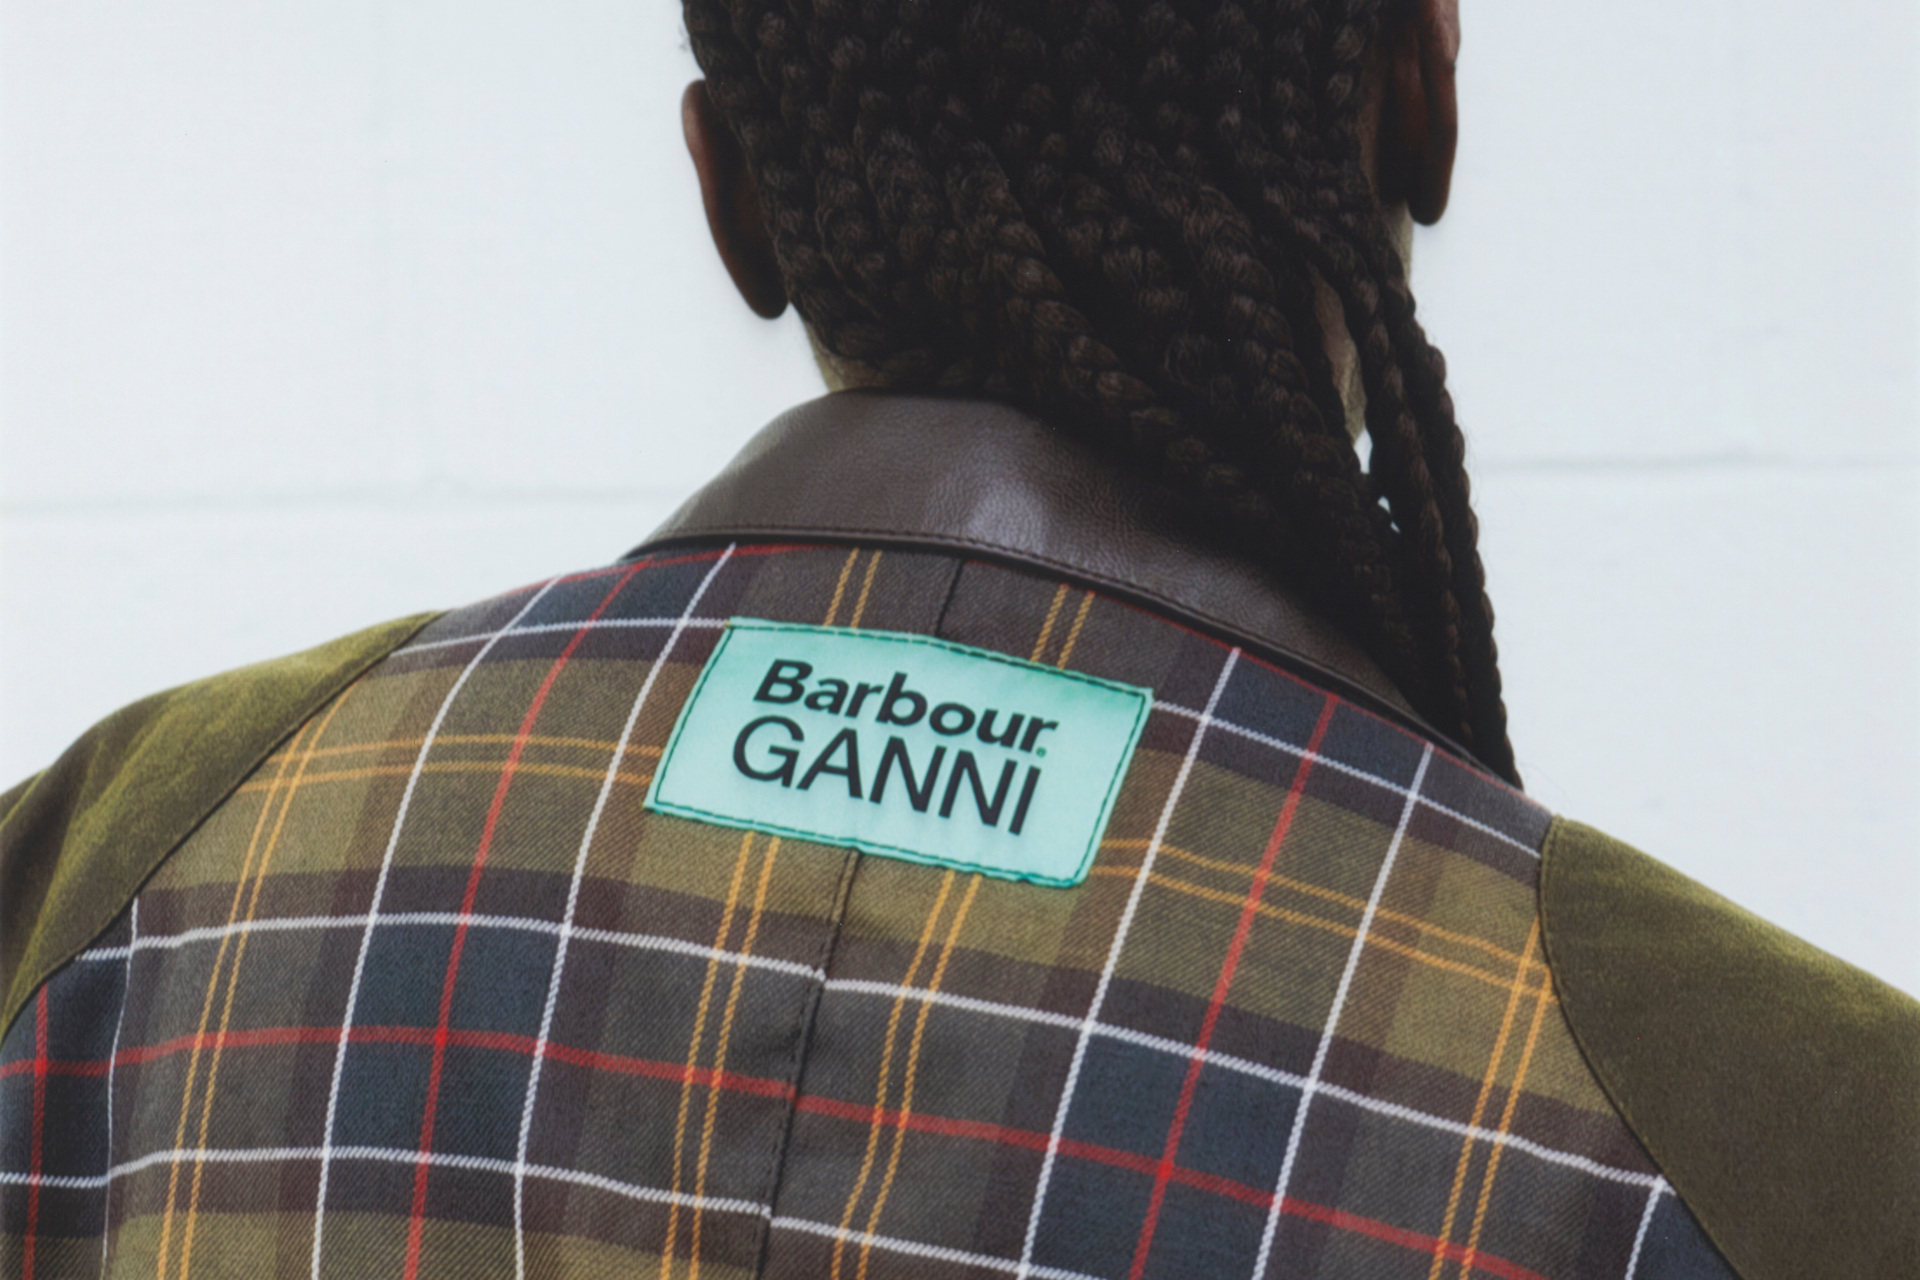 Ganni Launches Collaboration with Barbour